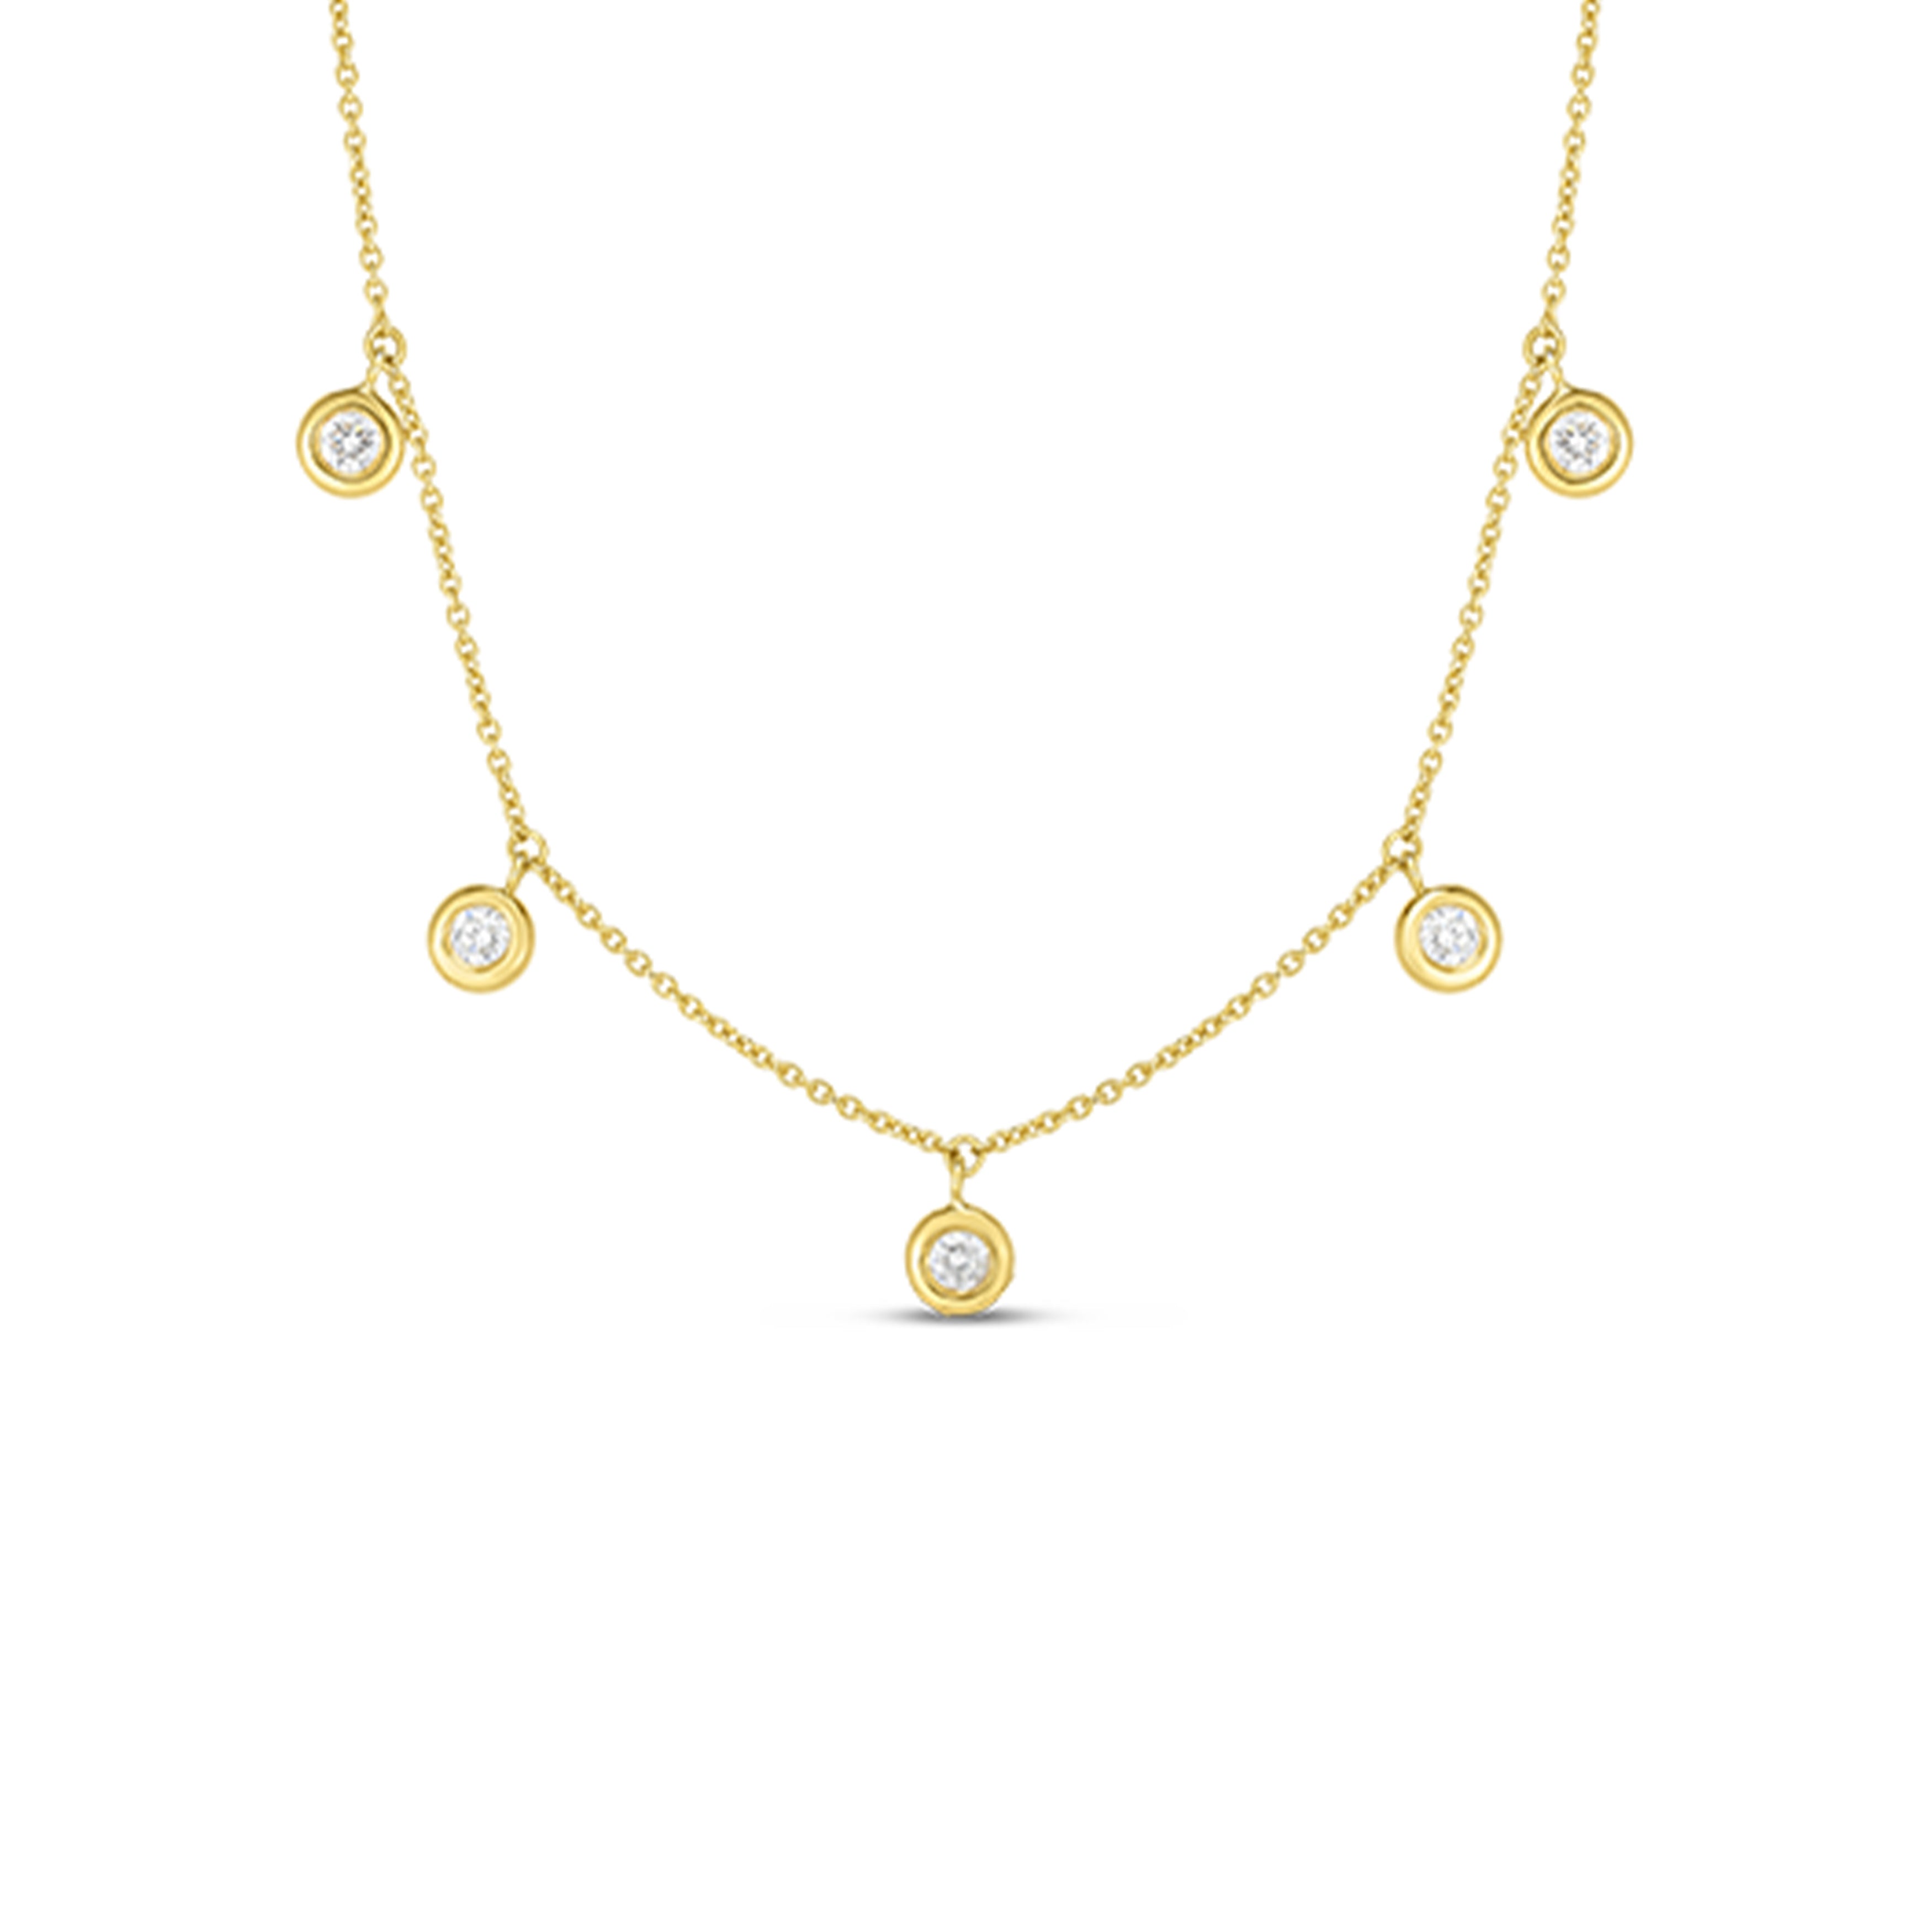 18K Yellow Gold Roberto Coin 5 Station Dangling Diamond Necklace